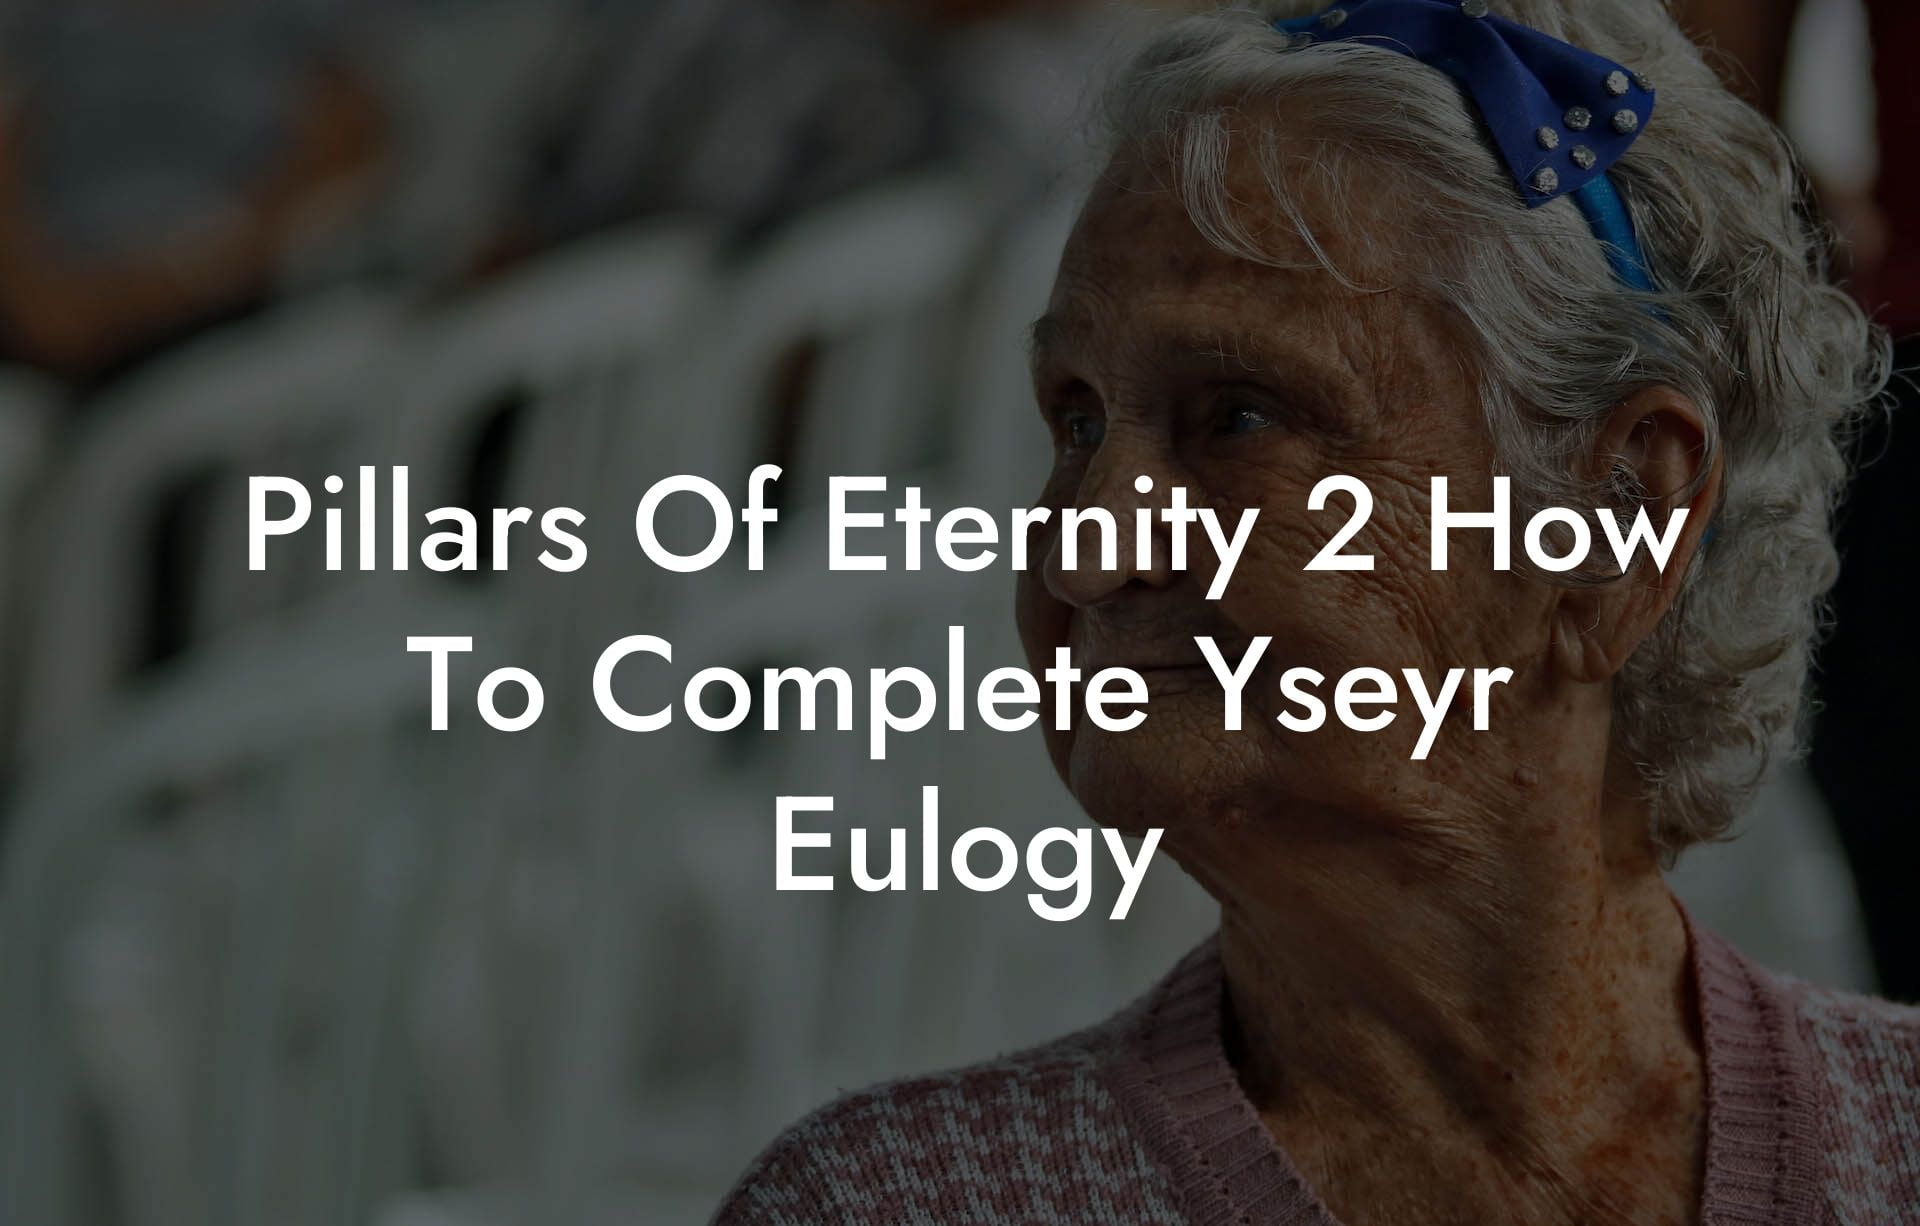 Pillars Of Eternity 2 How To Complete Yseyr Eulogy